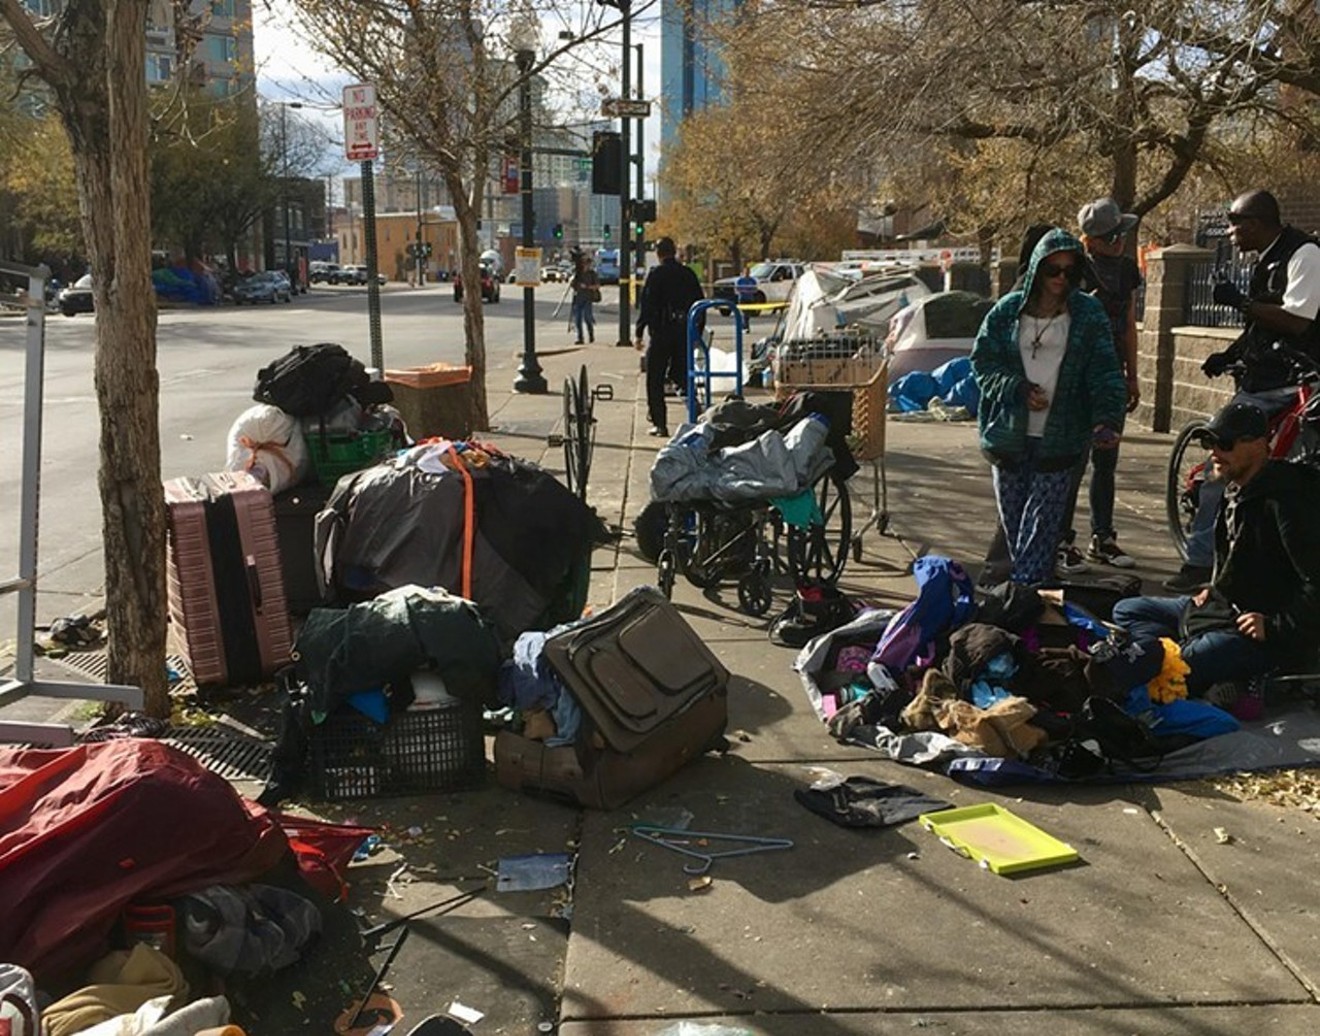 The initiative that would have overturned Denver’s urban camping ban failed. Now what?